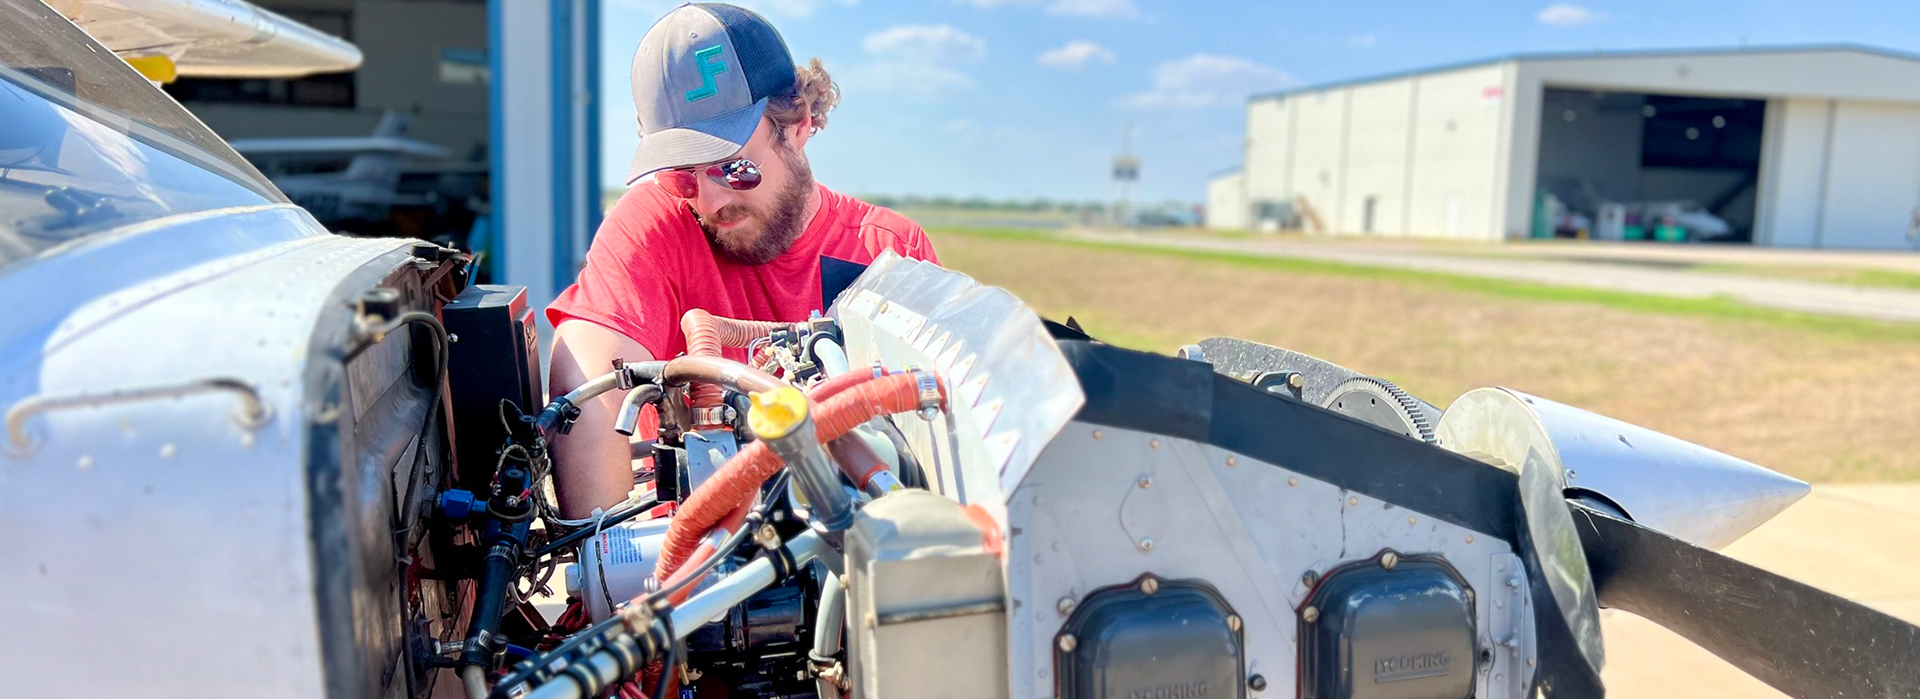 Are you ready to launch your career in aircraft maintenance?